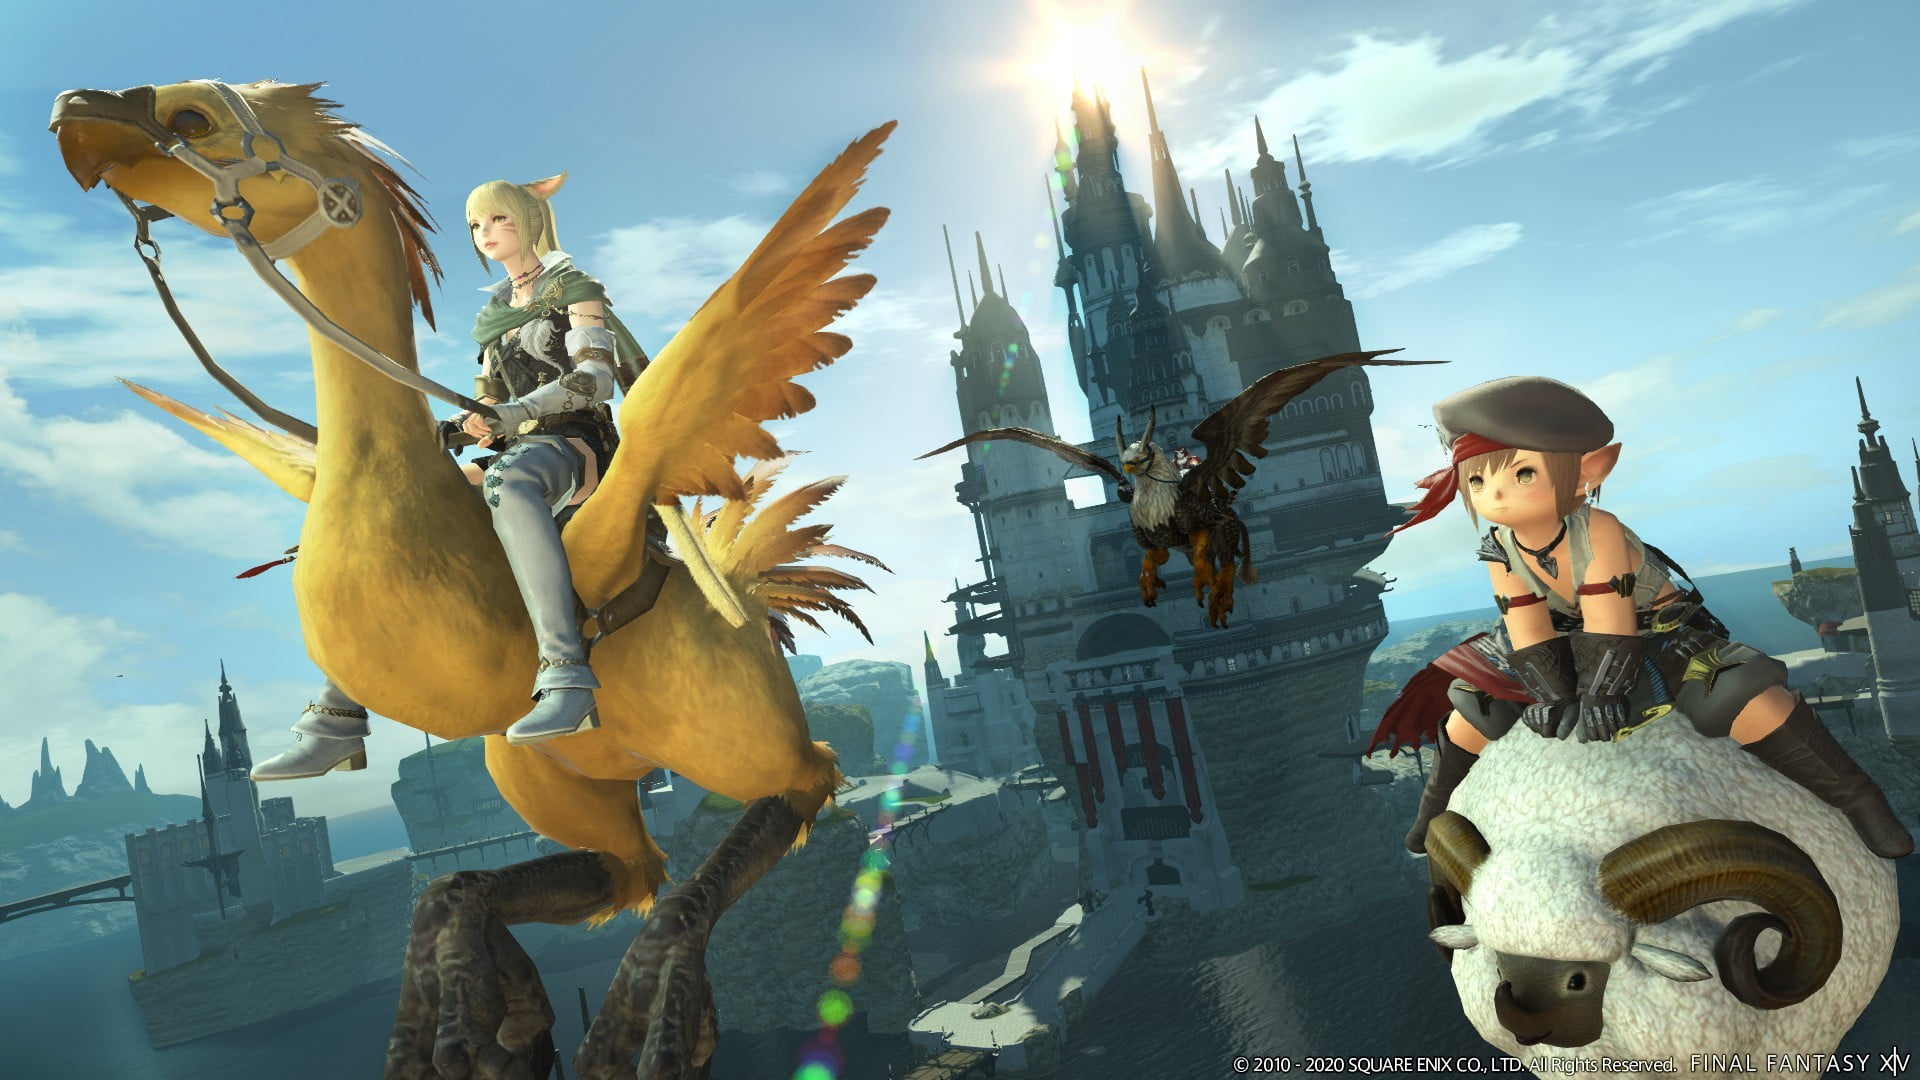 Director says Final Fantasy XIV is not Metaverse